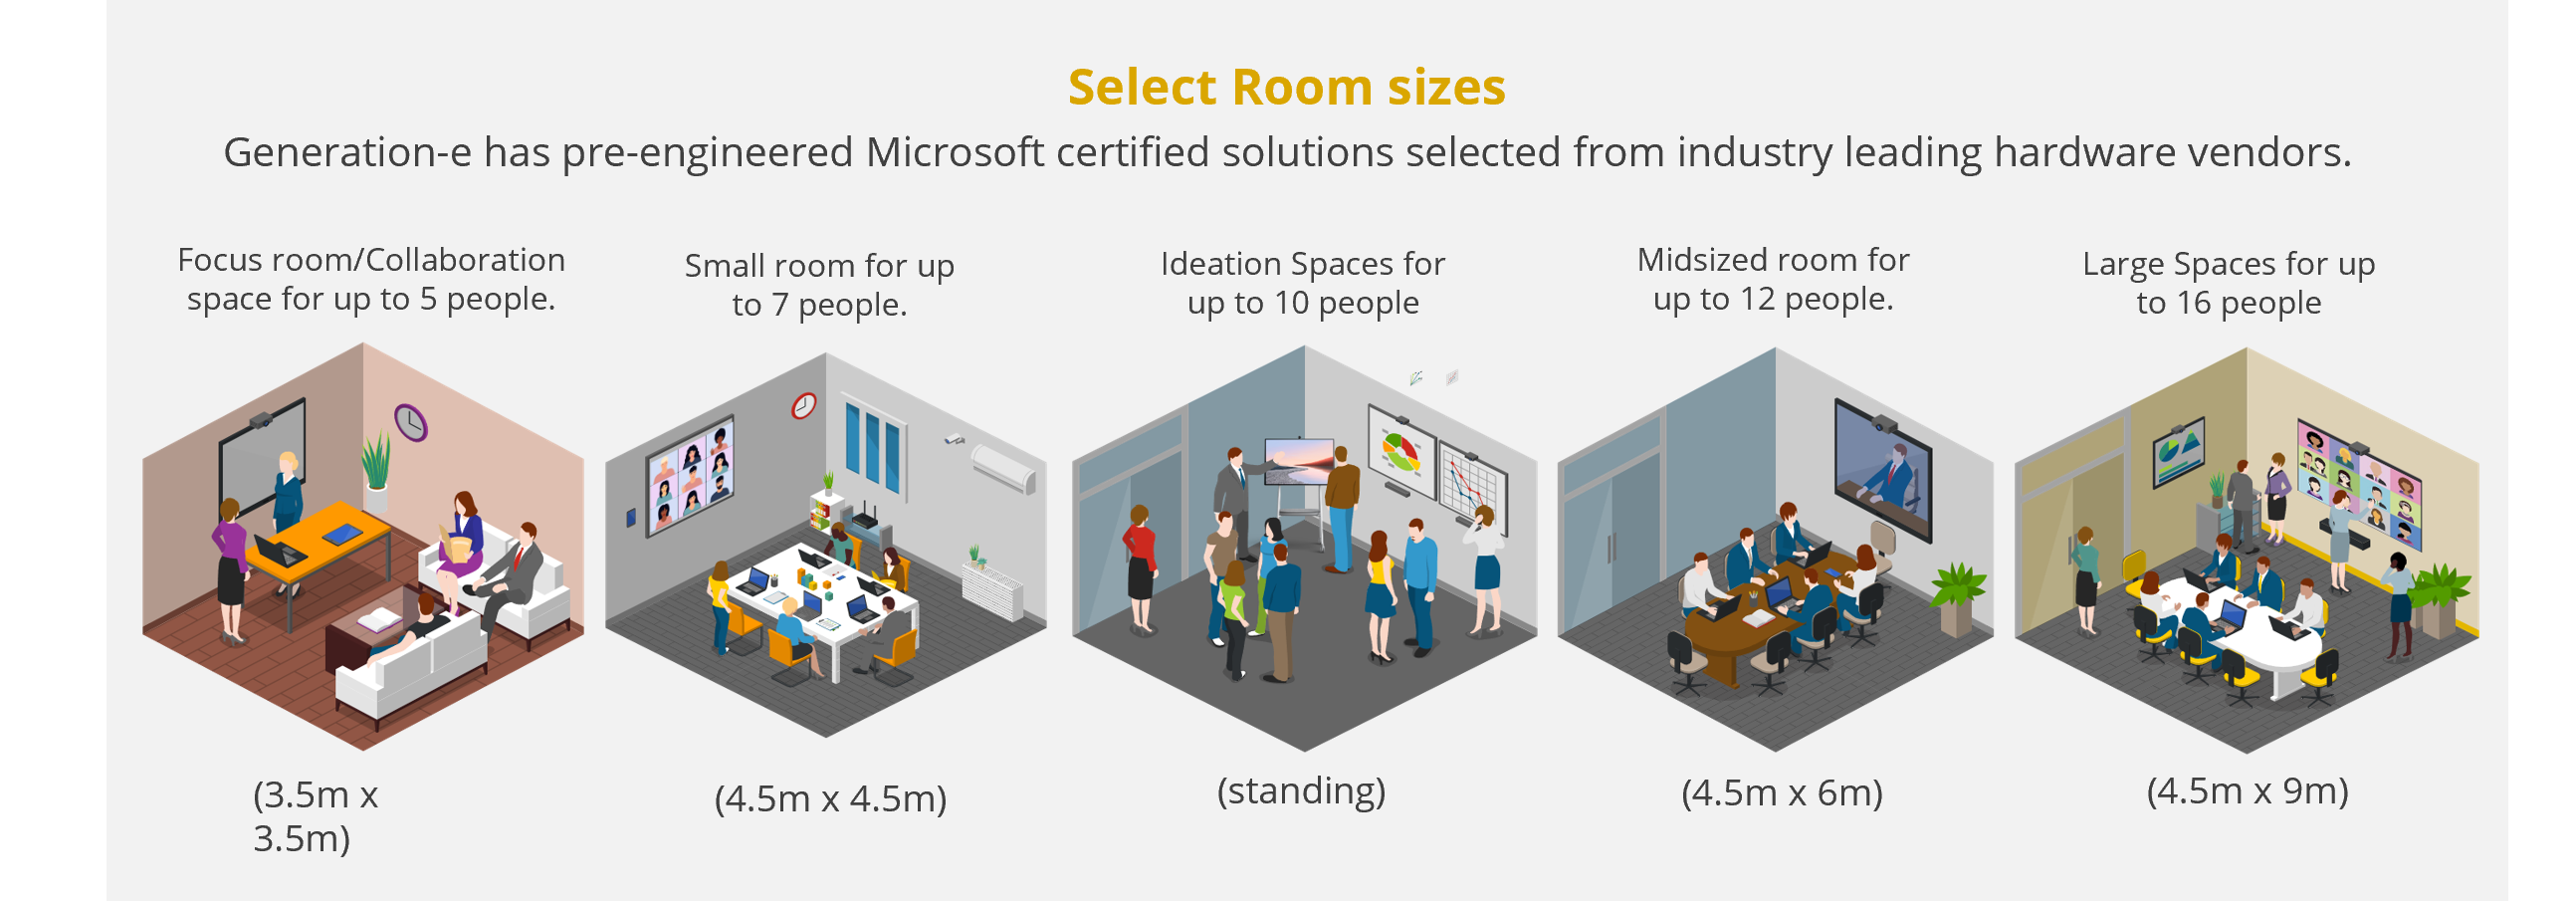 Select Rooms image